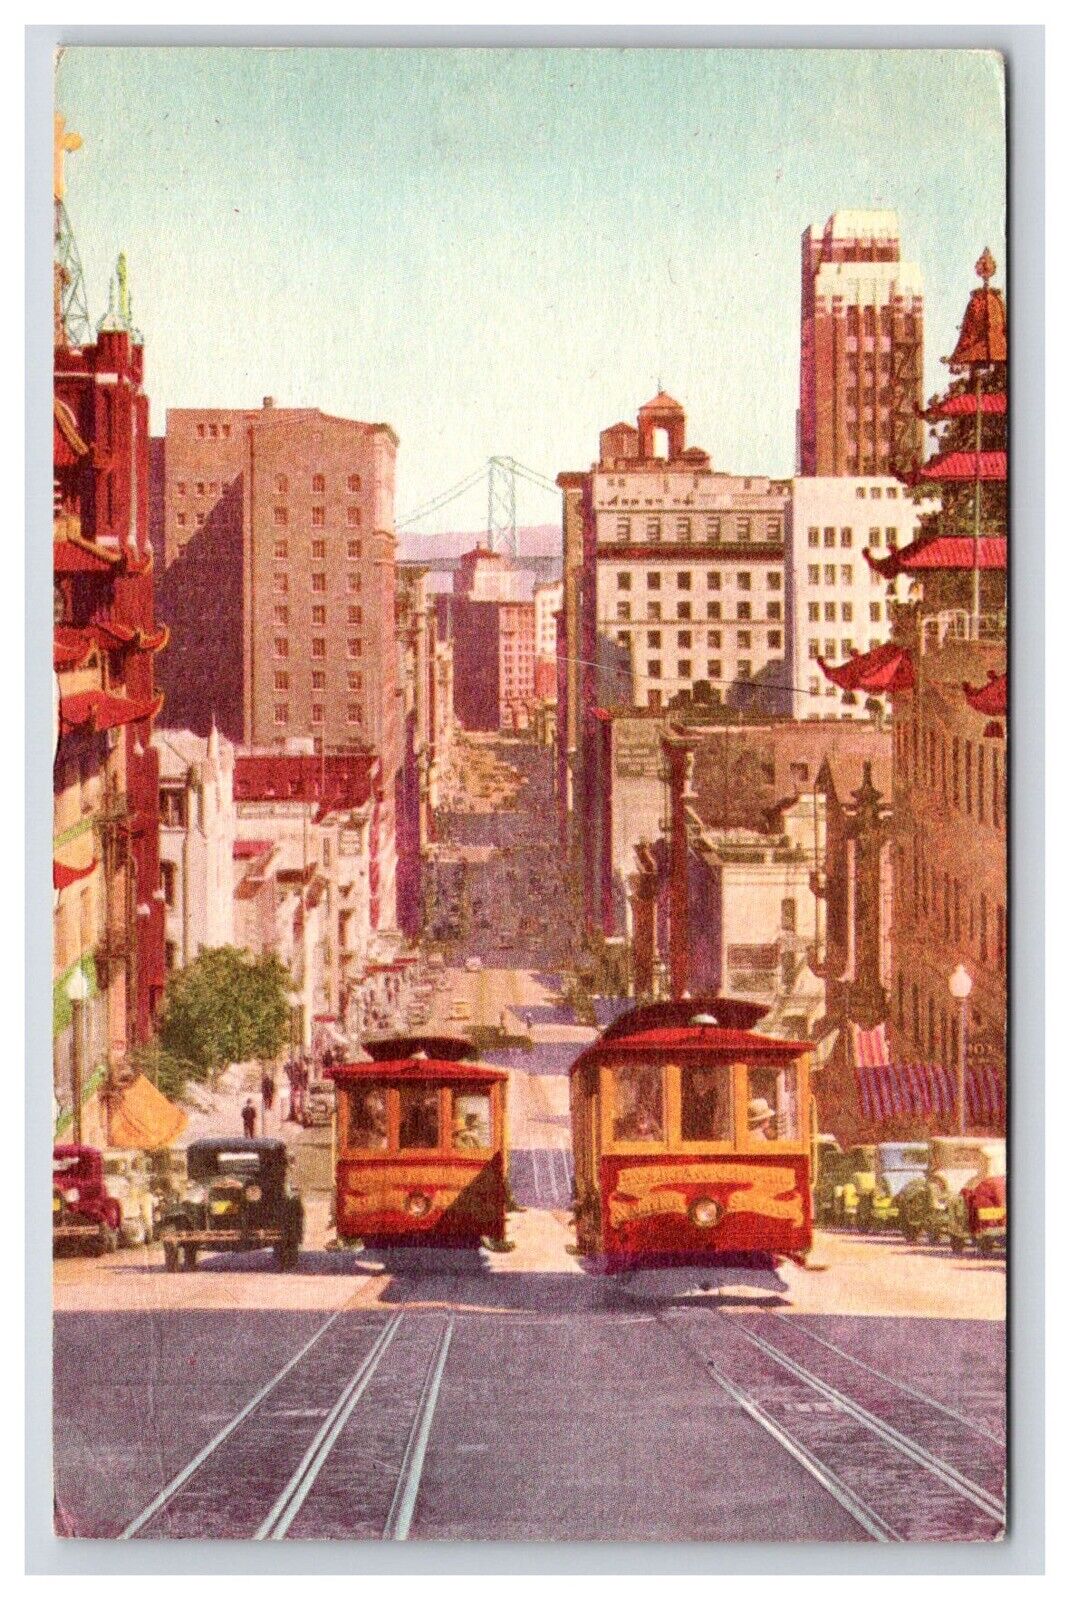 Postcard: CA 1939 Cable Cars On A Street, San Francisco, California - Posted